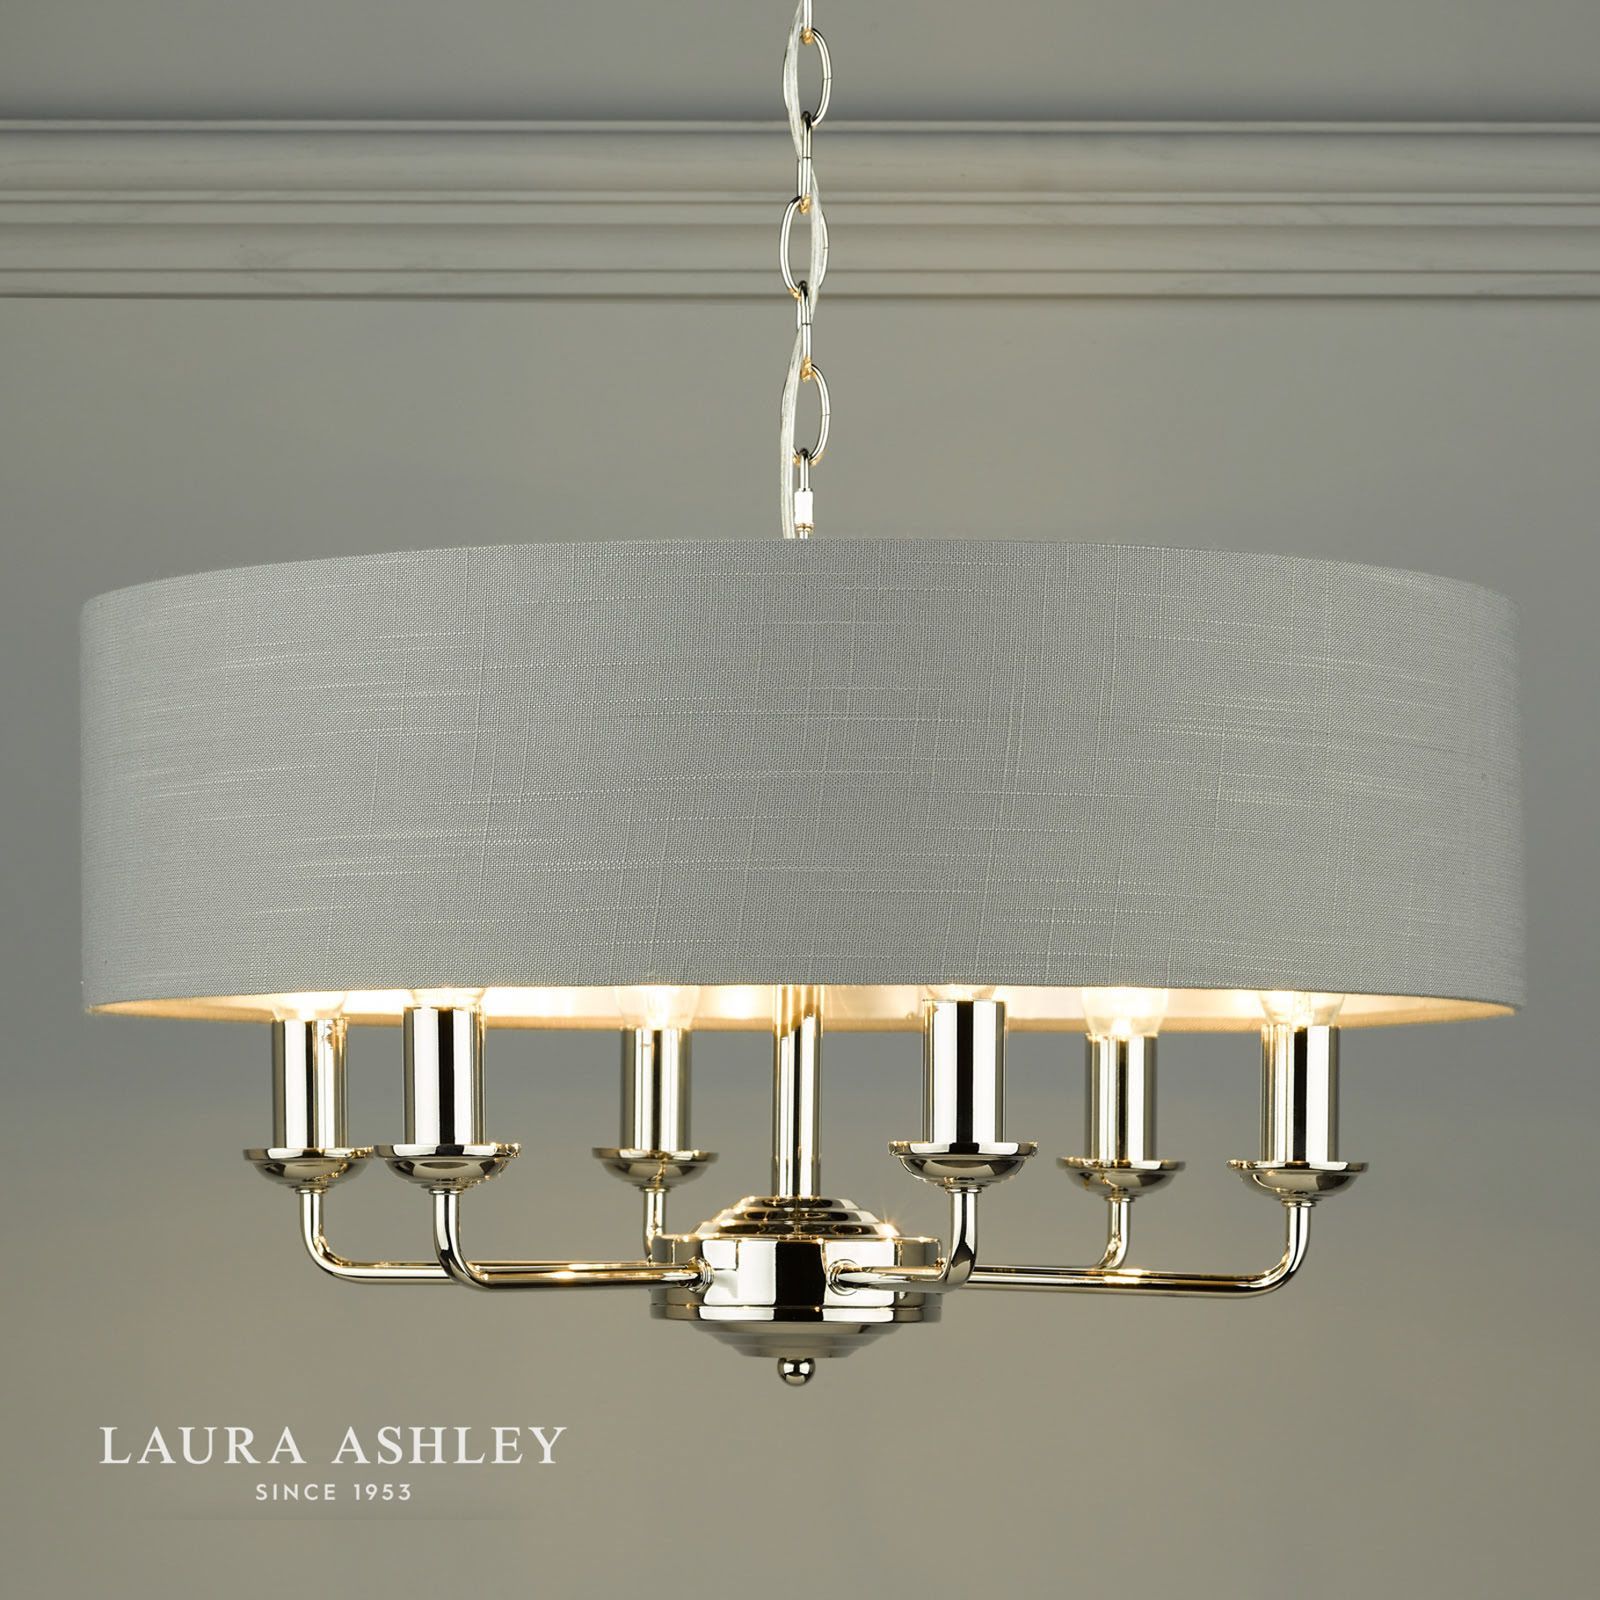 Laura Ashley Sorrento Polished Nickel 6 Light Armed Throughout Stone Grey With Brushed Nickel Six Light Chandeliers (View 8 of 15)